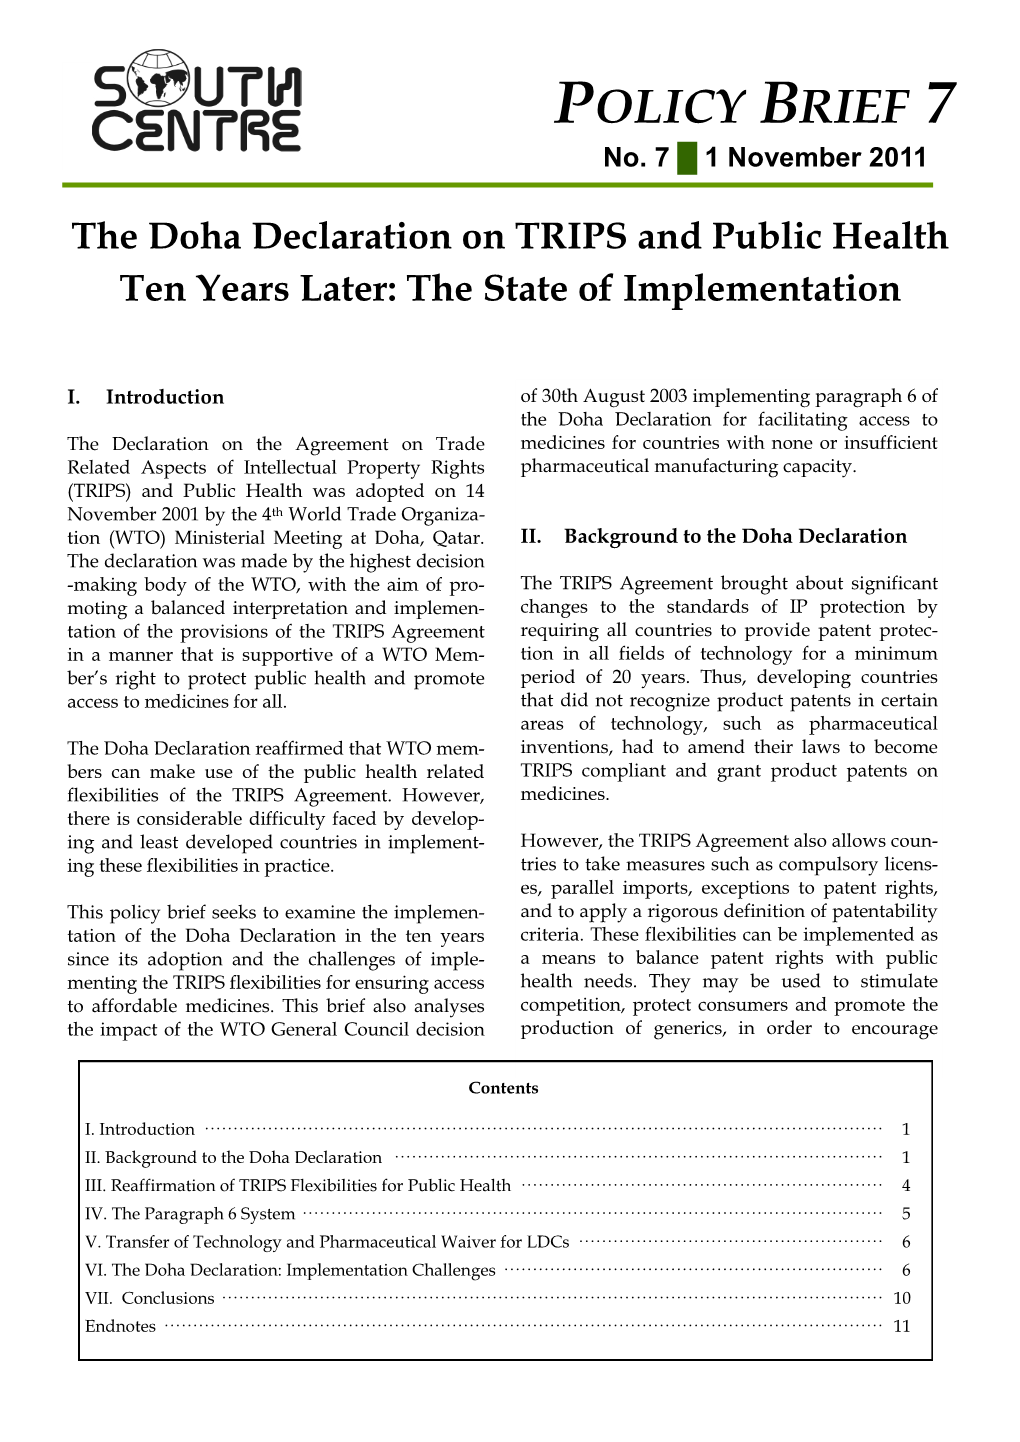 Doha Declaration on TRIPS and Public Health Ten Years Later: the State of Implementation